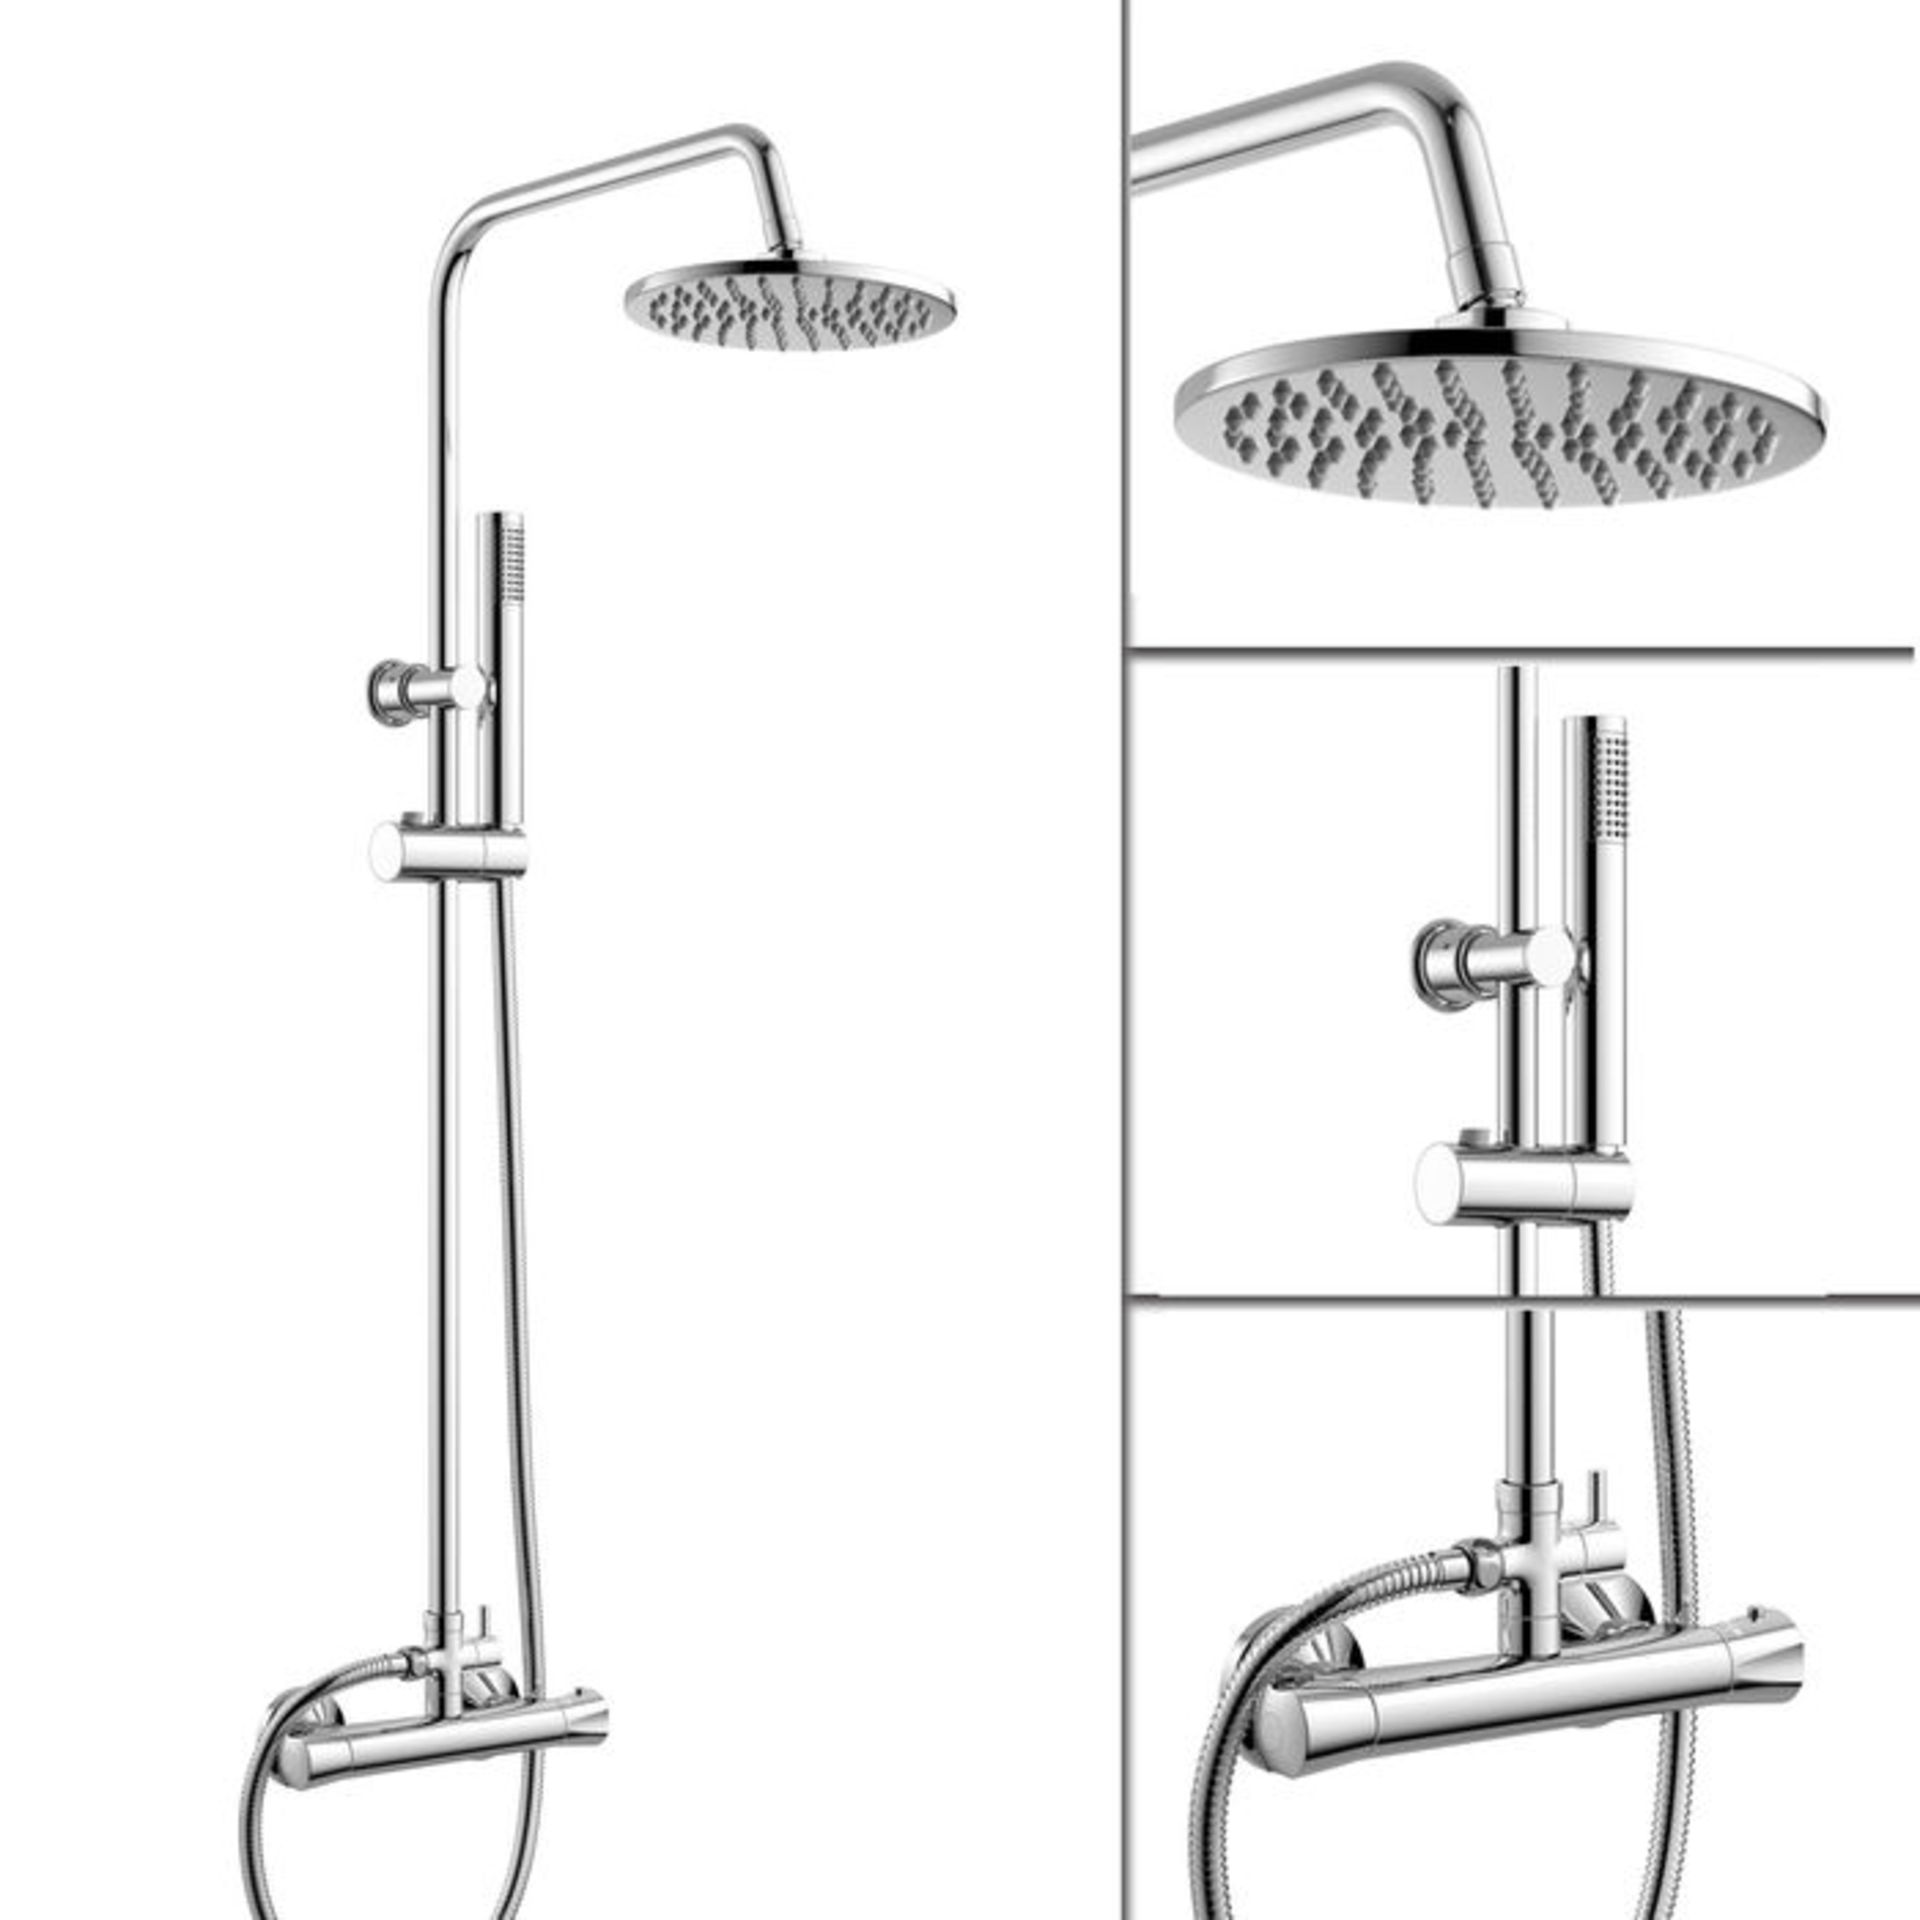 (PP152) Round Exposed Thermostatic Shower Kit & Head. Shower head features a tilt action for maximum - Image 2 of 2